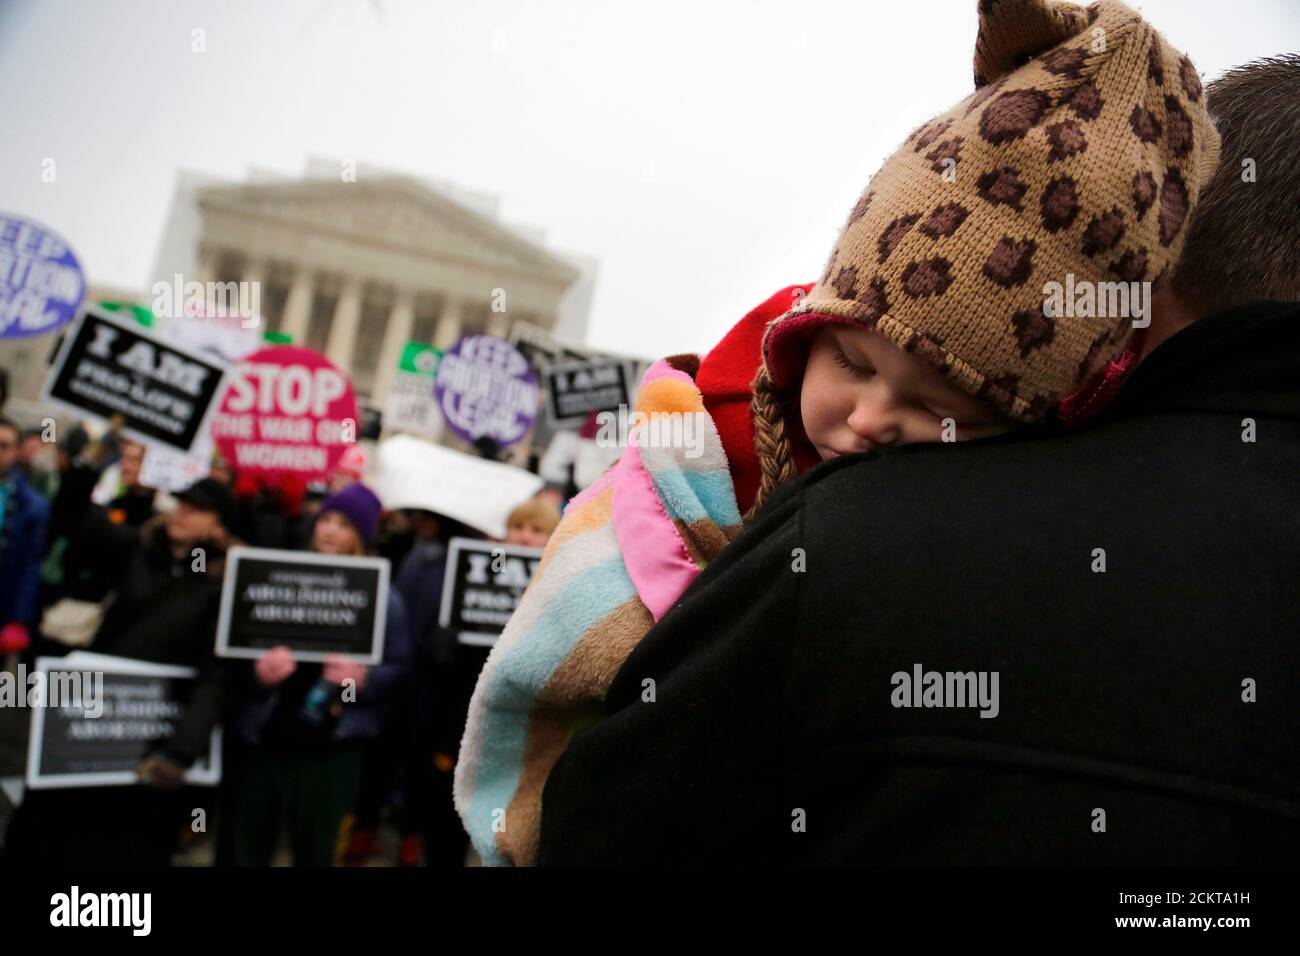 Paisley Fowles, aged one, of Naples, Florida, sleeps on her father's shoulder amidst the din of the annual March for Life rally at the U.S. Supreme Court building in Washington, January 25, 2013. The anti-abortion marchers marked the 40th anniversary of the Roe v. Wade U.S. Supreme Court ruling legalizing abortion, and Pope Benedict expressed support for the demonstrators. REUTERS/Jonathan Ernst Stock Photo